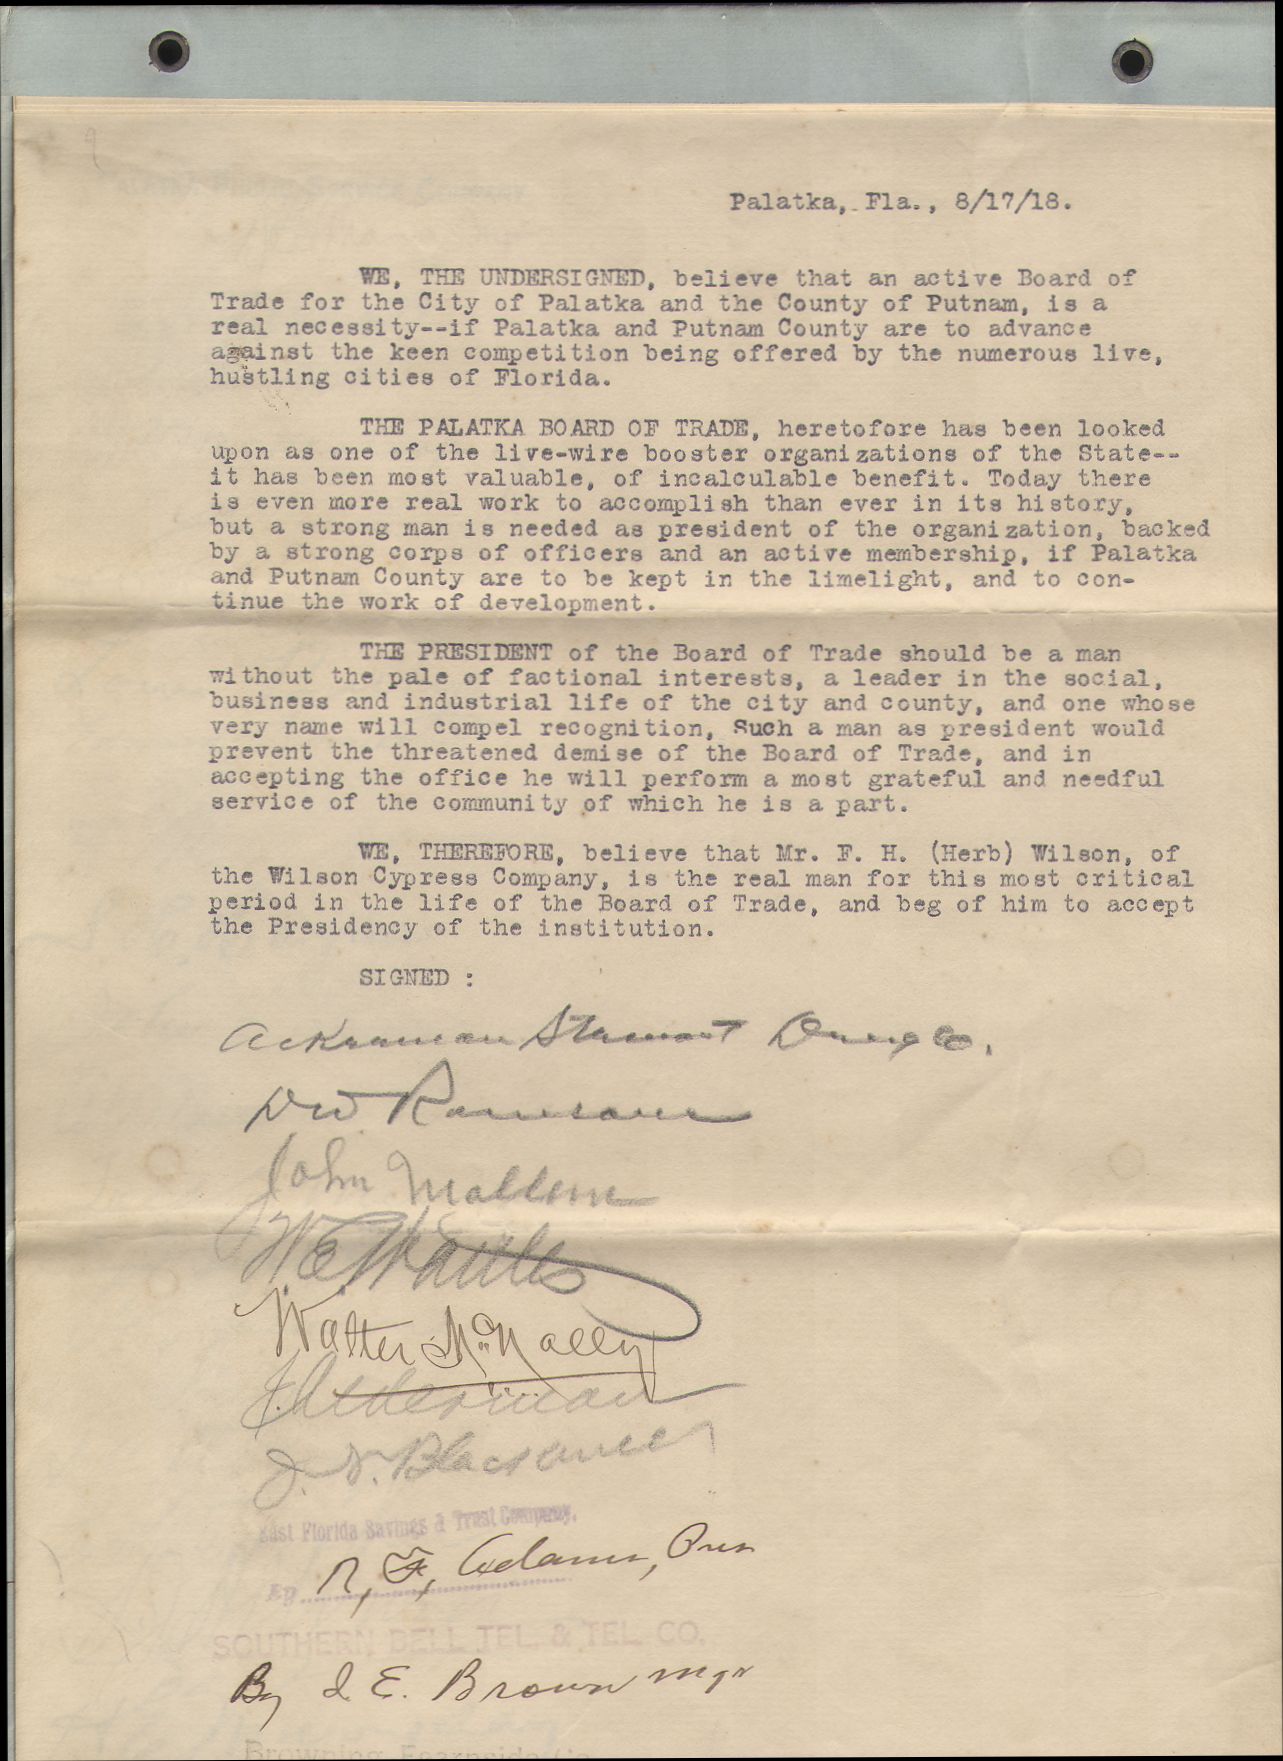 1918 petition